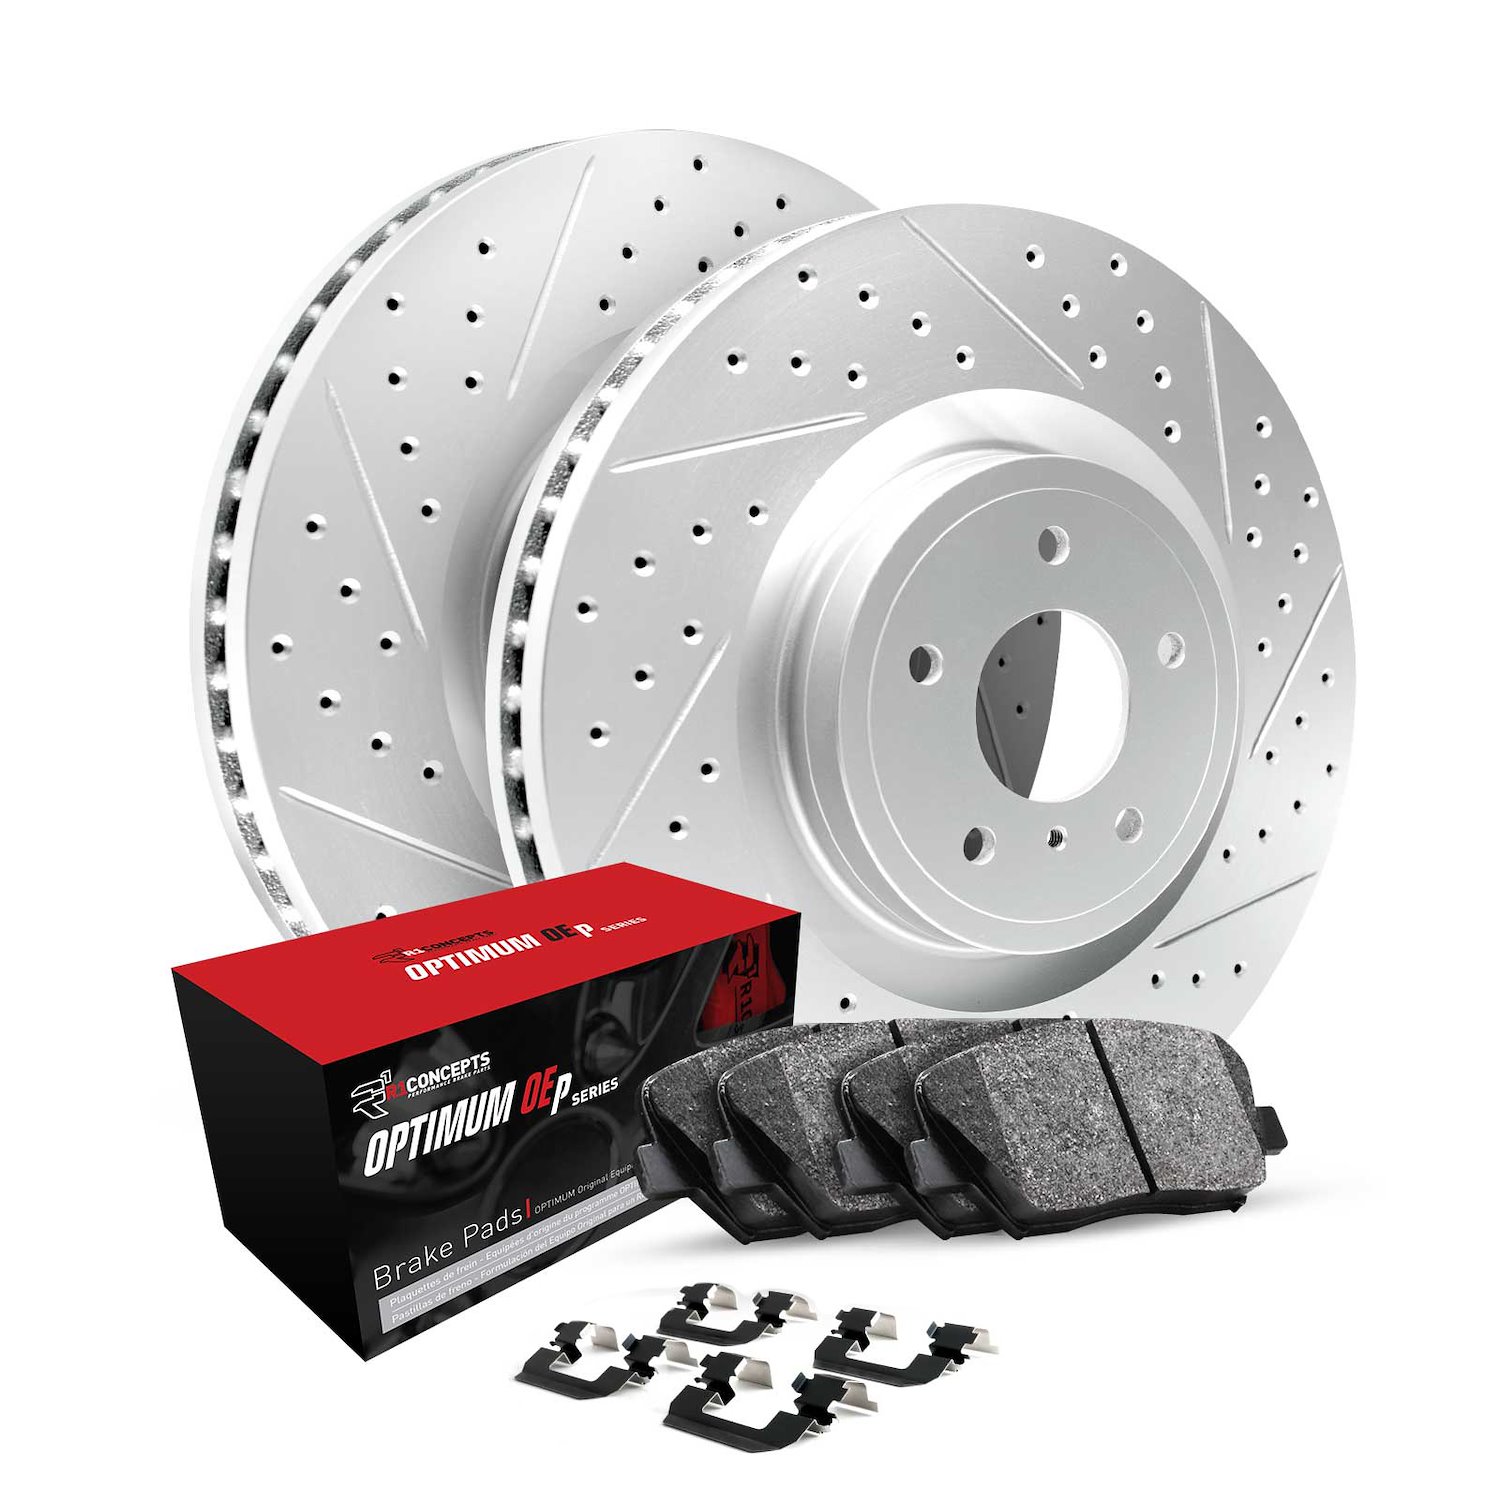 GEO-Carbon Drilled/Slotted Rotors w/Optimum OE Pads/Hardware, 2007-2017 Fits Multiple Makes/Models, Position: Rear